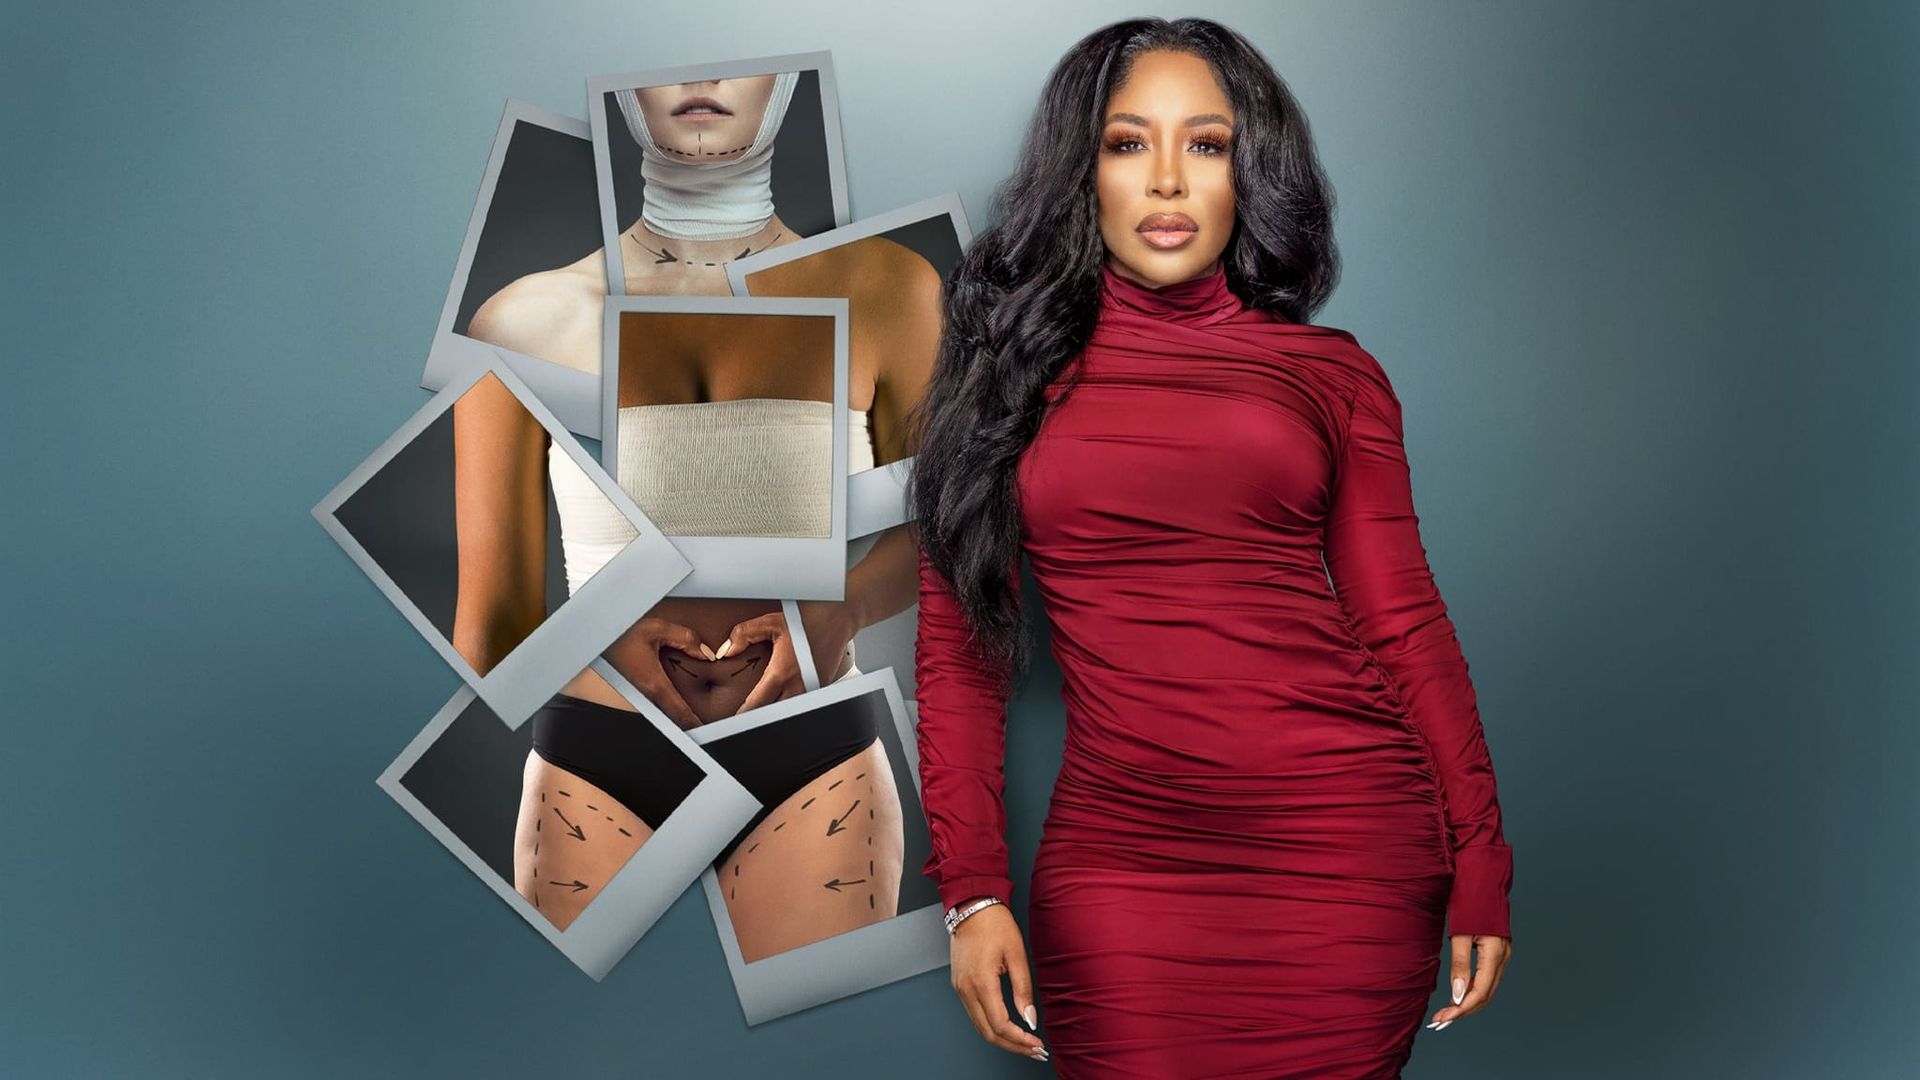 My Killer Body with K. Michelle background